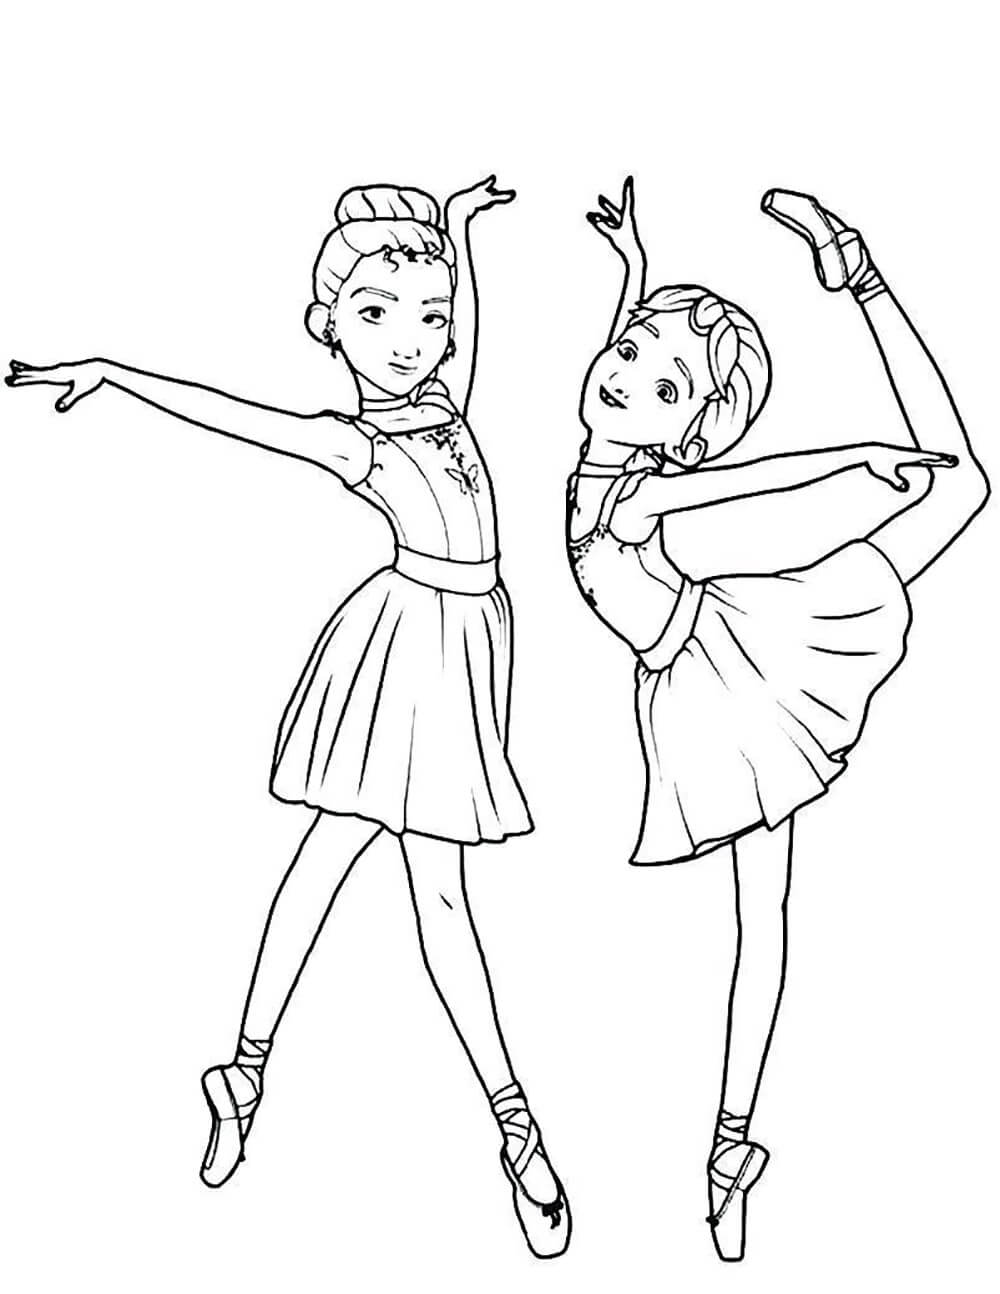 Lovely Ballerina Coloring Page - Free Printable Coloring Pages for Kids